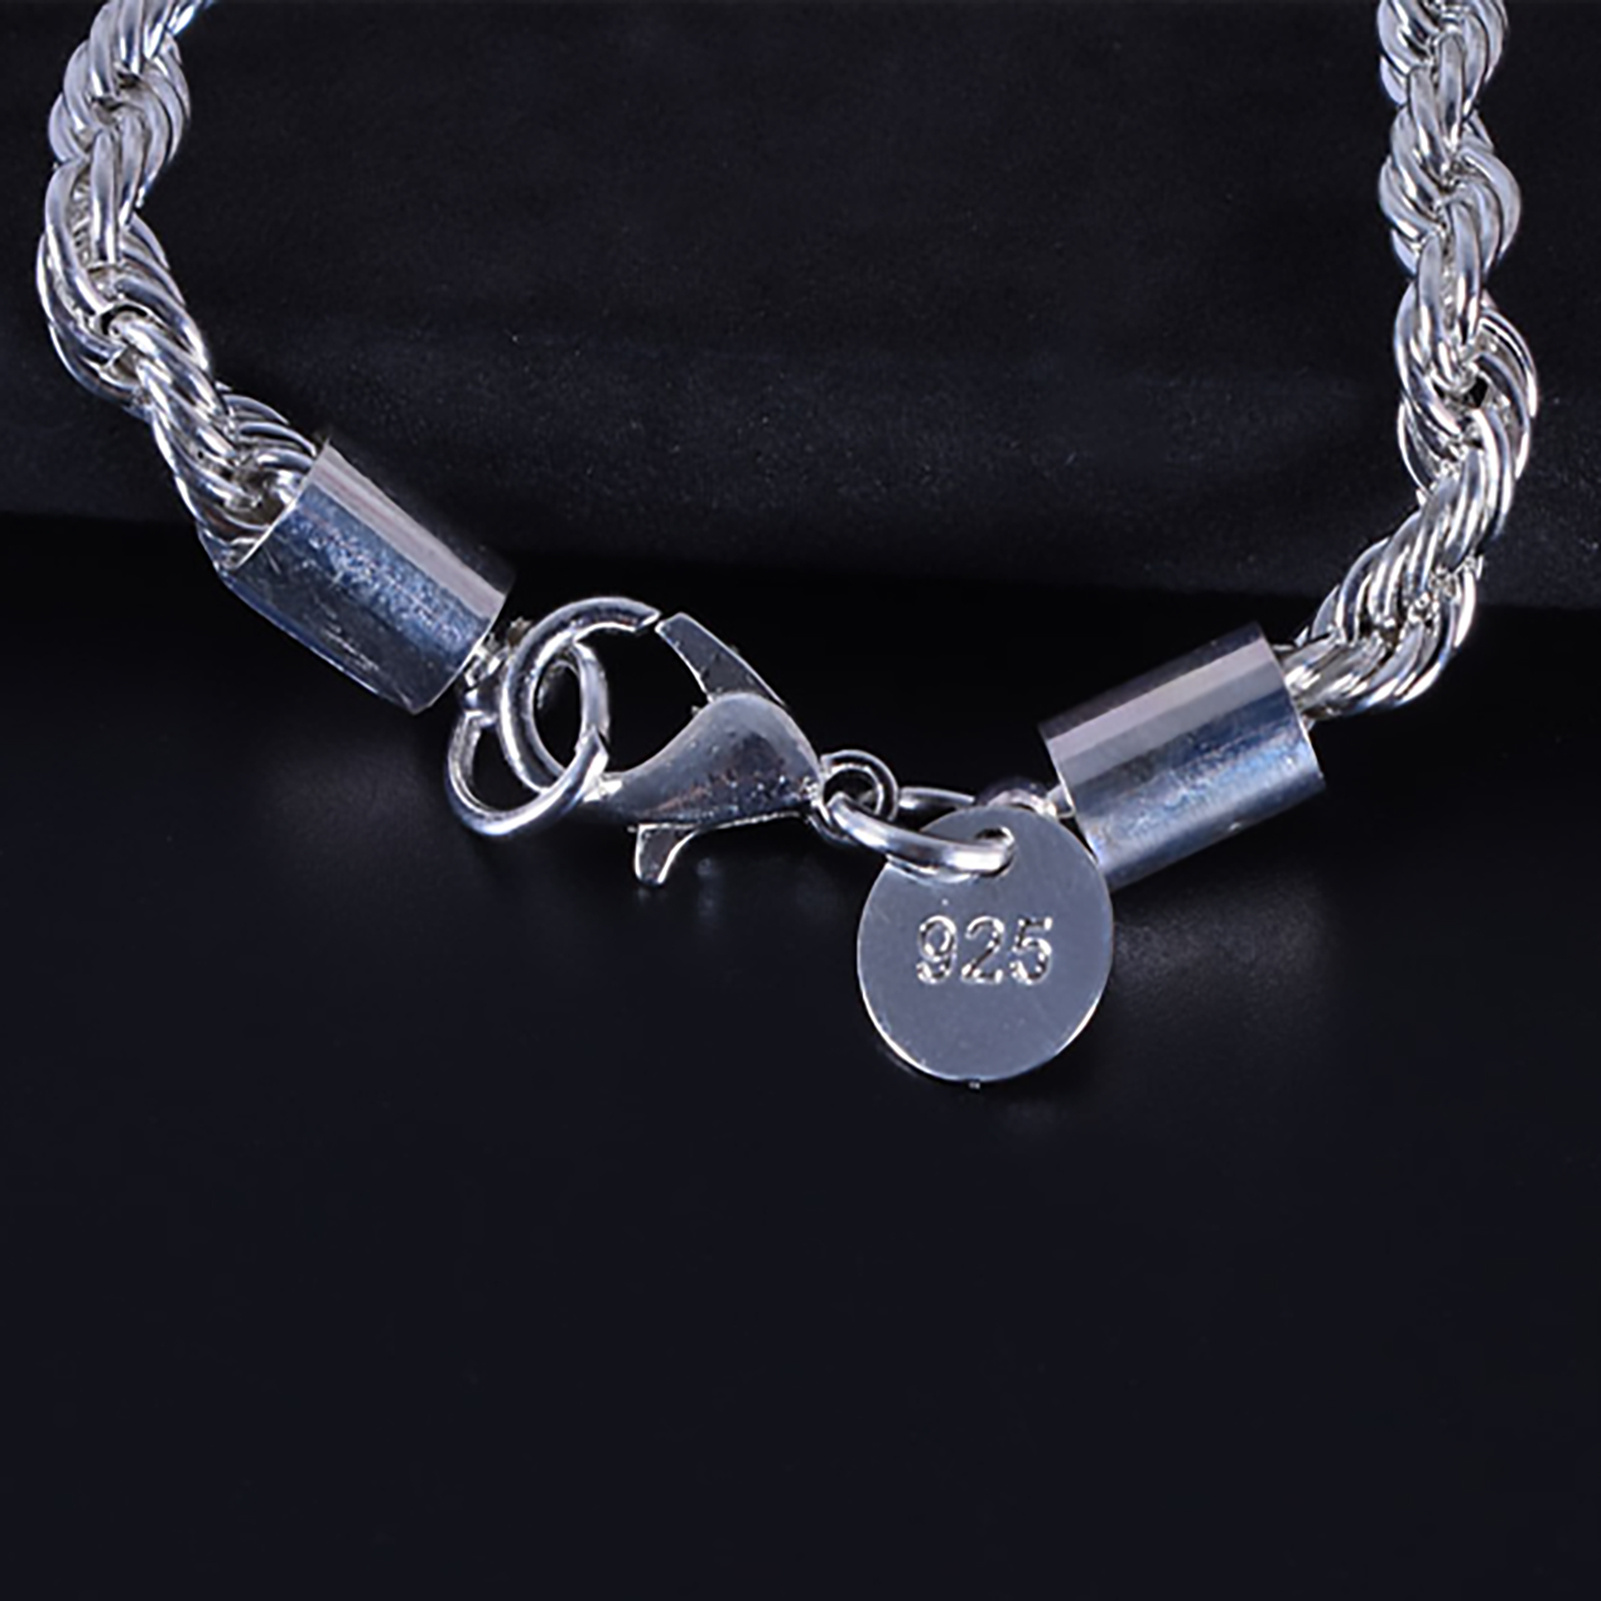 

A 925 Sterling Silver Twisted Bracelet With A Length Of 7.87 Inches, Designed For Women, With A Bracelet Pendant And A Party Jewelry Clasp.